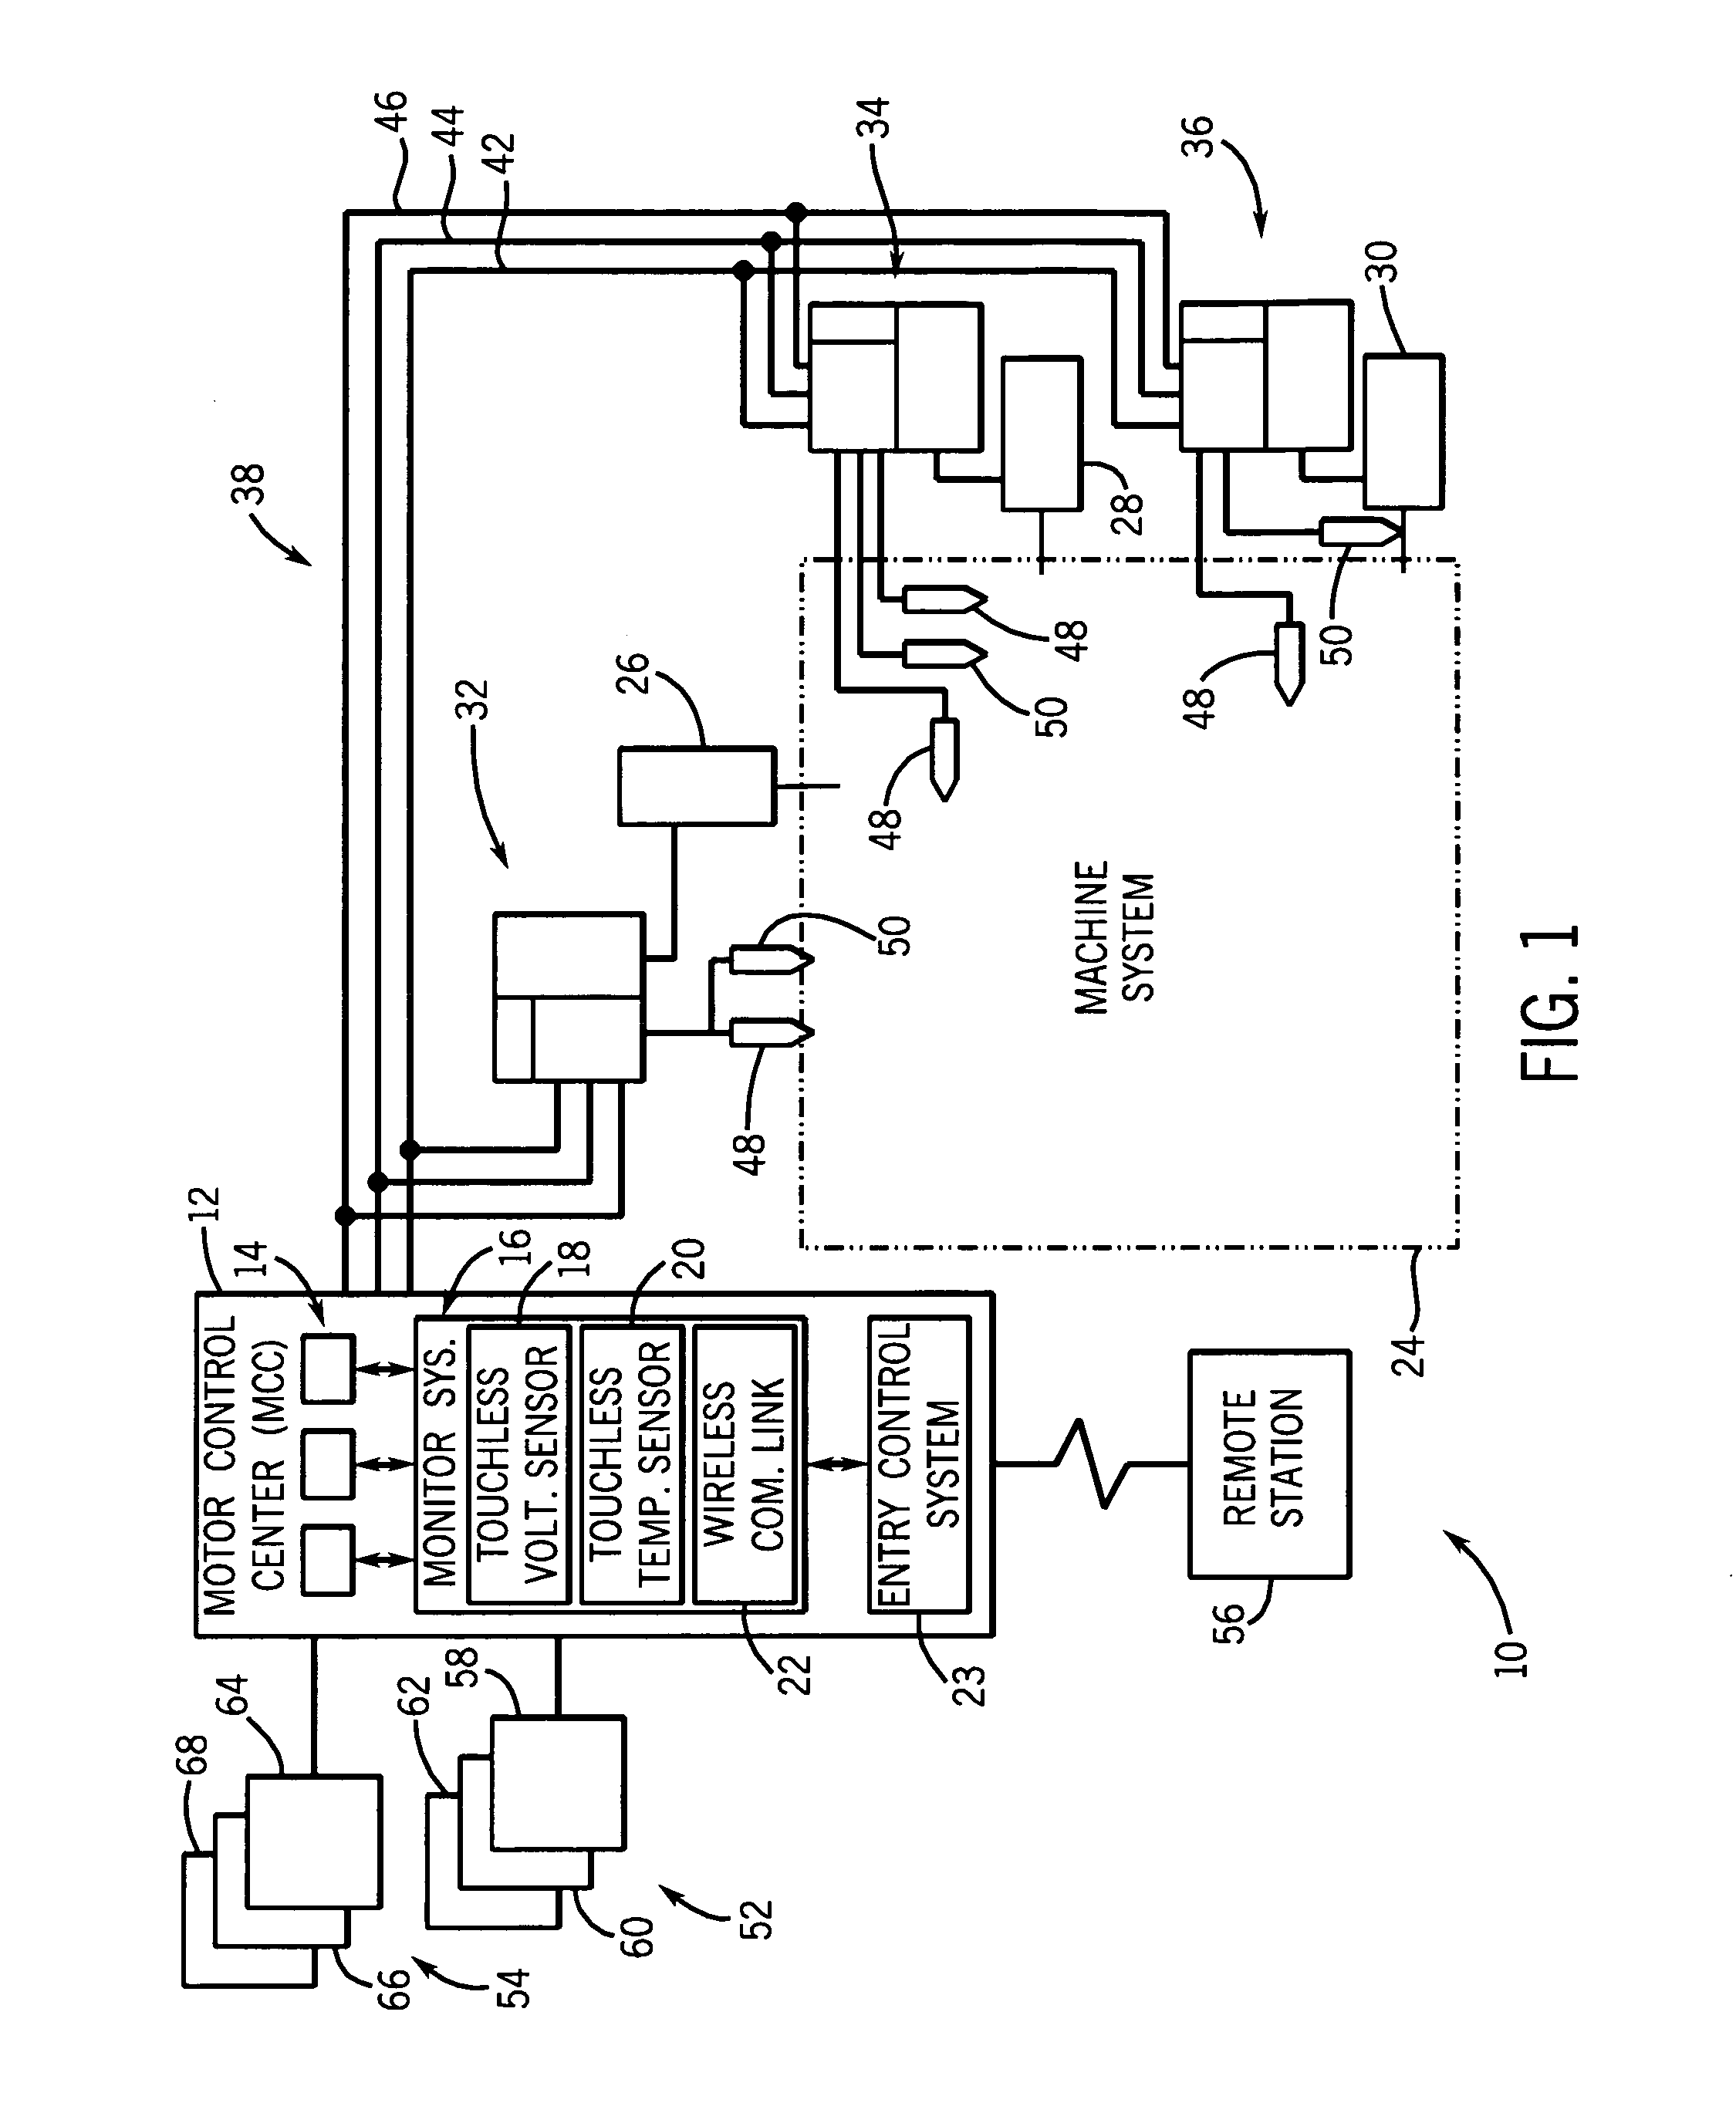 System and method for automatically securing a motor control center